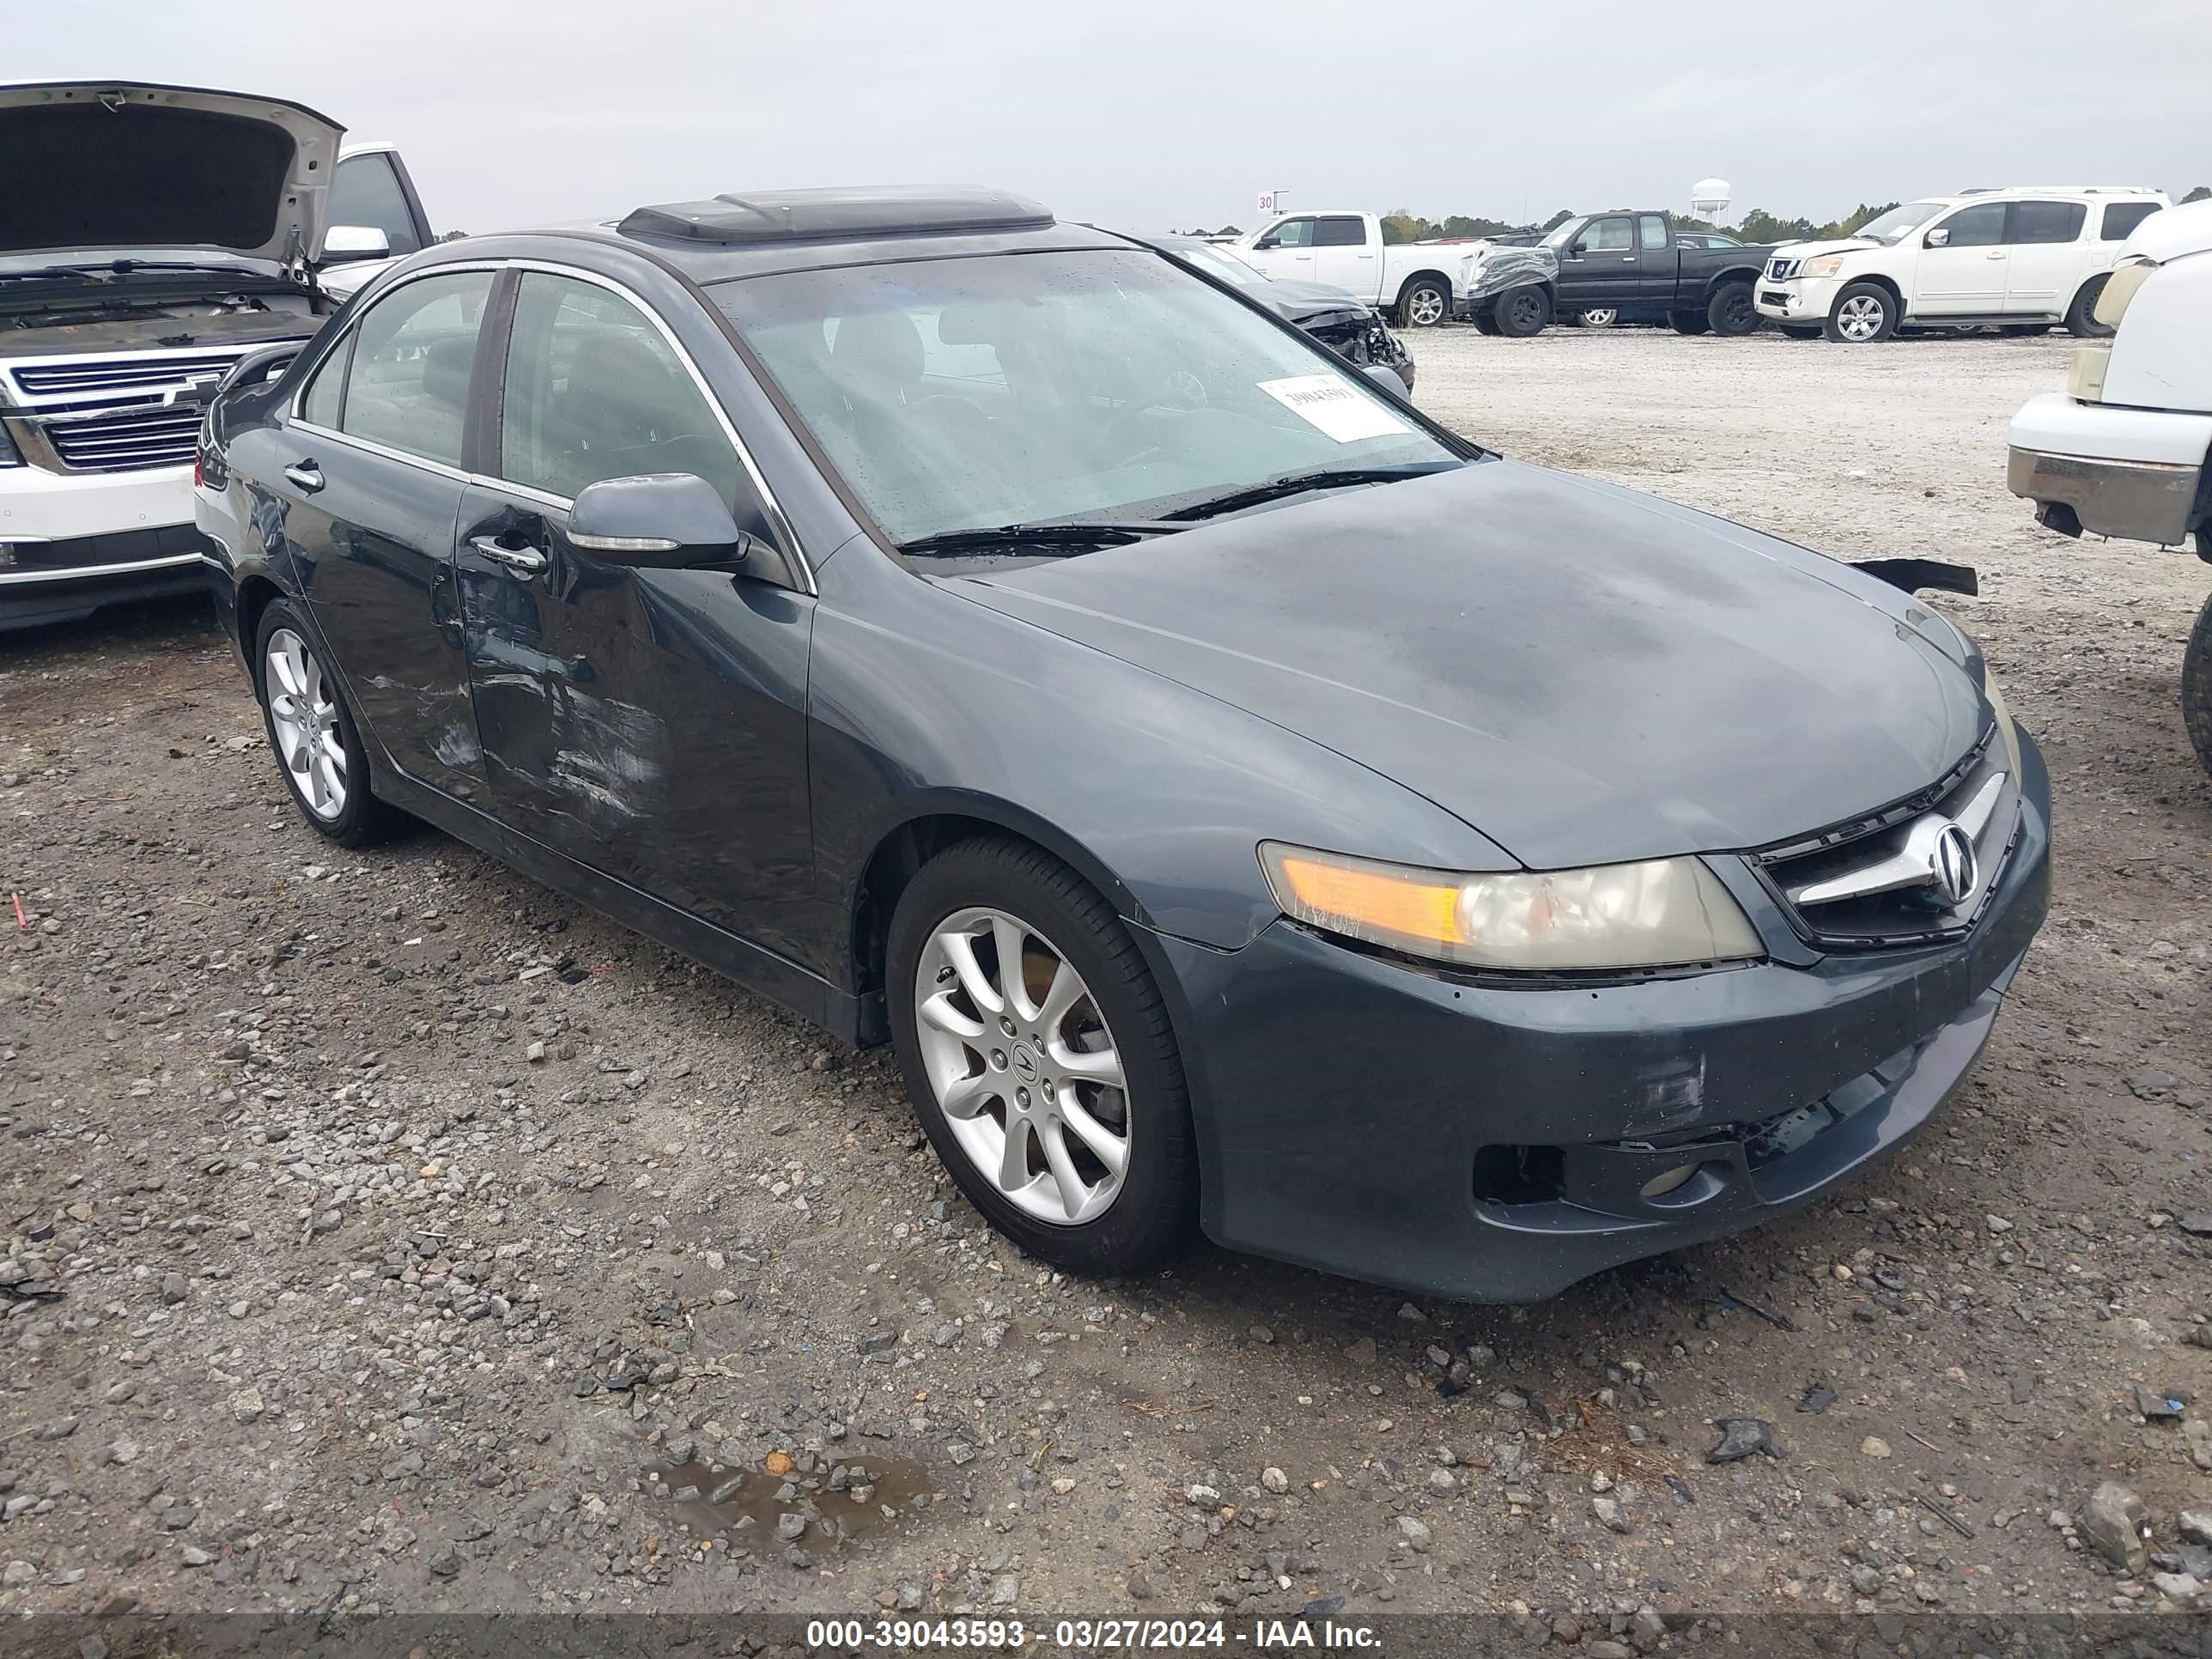 vin: JH4CL96878C002522 JH4CL96878C002522 2008 acura tsx 2400 for Sale in 27520, 60 Sadisco Rd, Clayton, North Carolina, USA